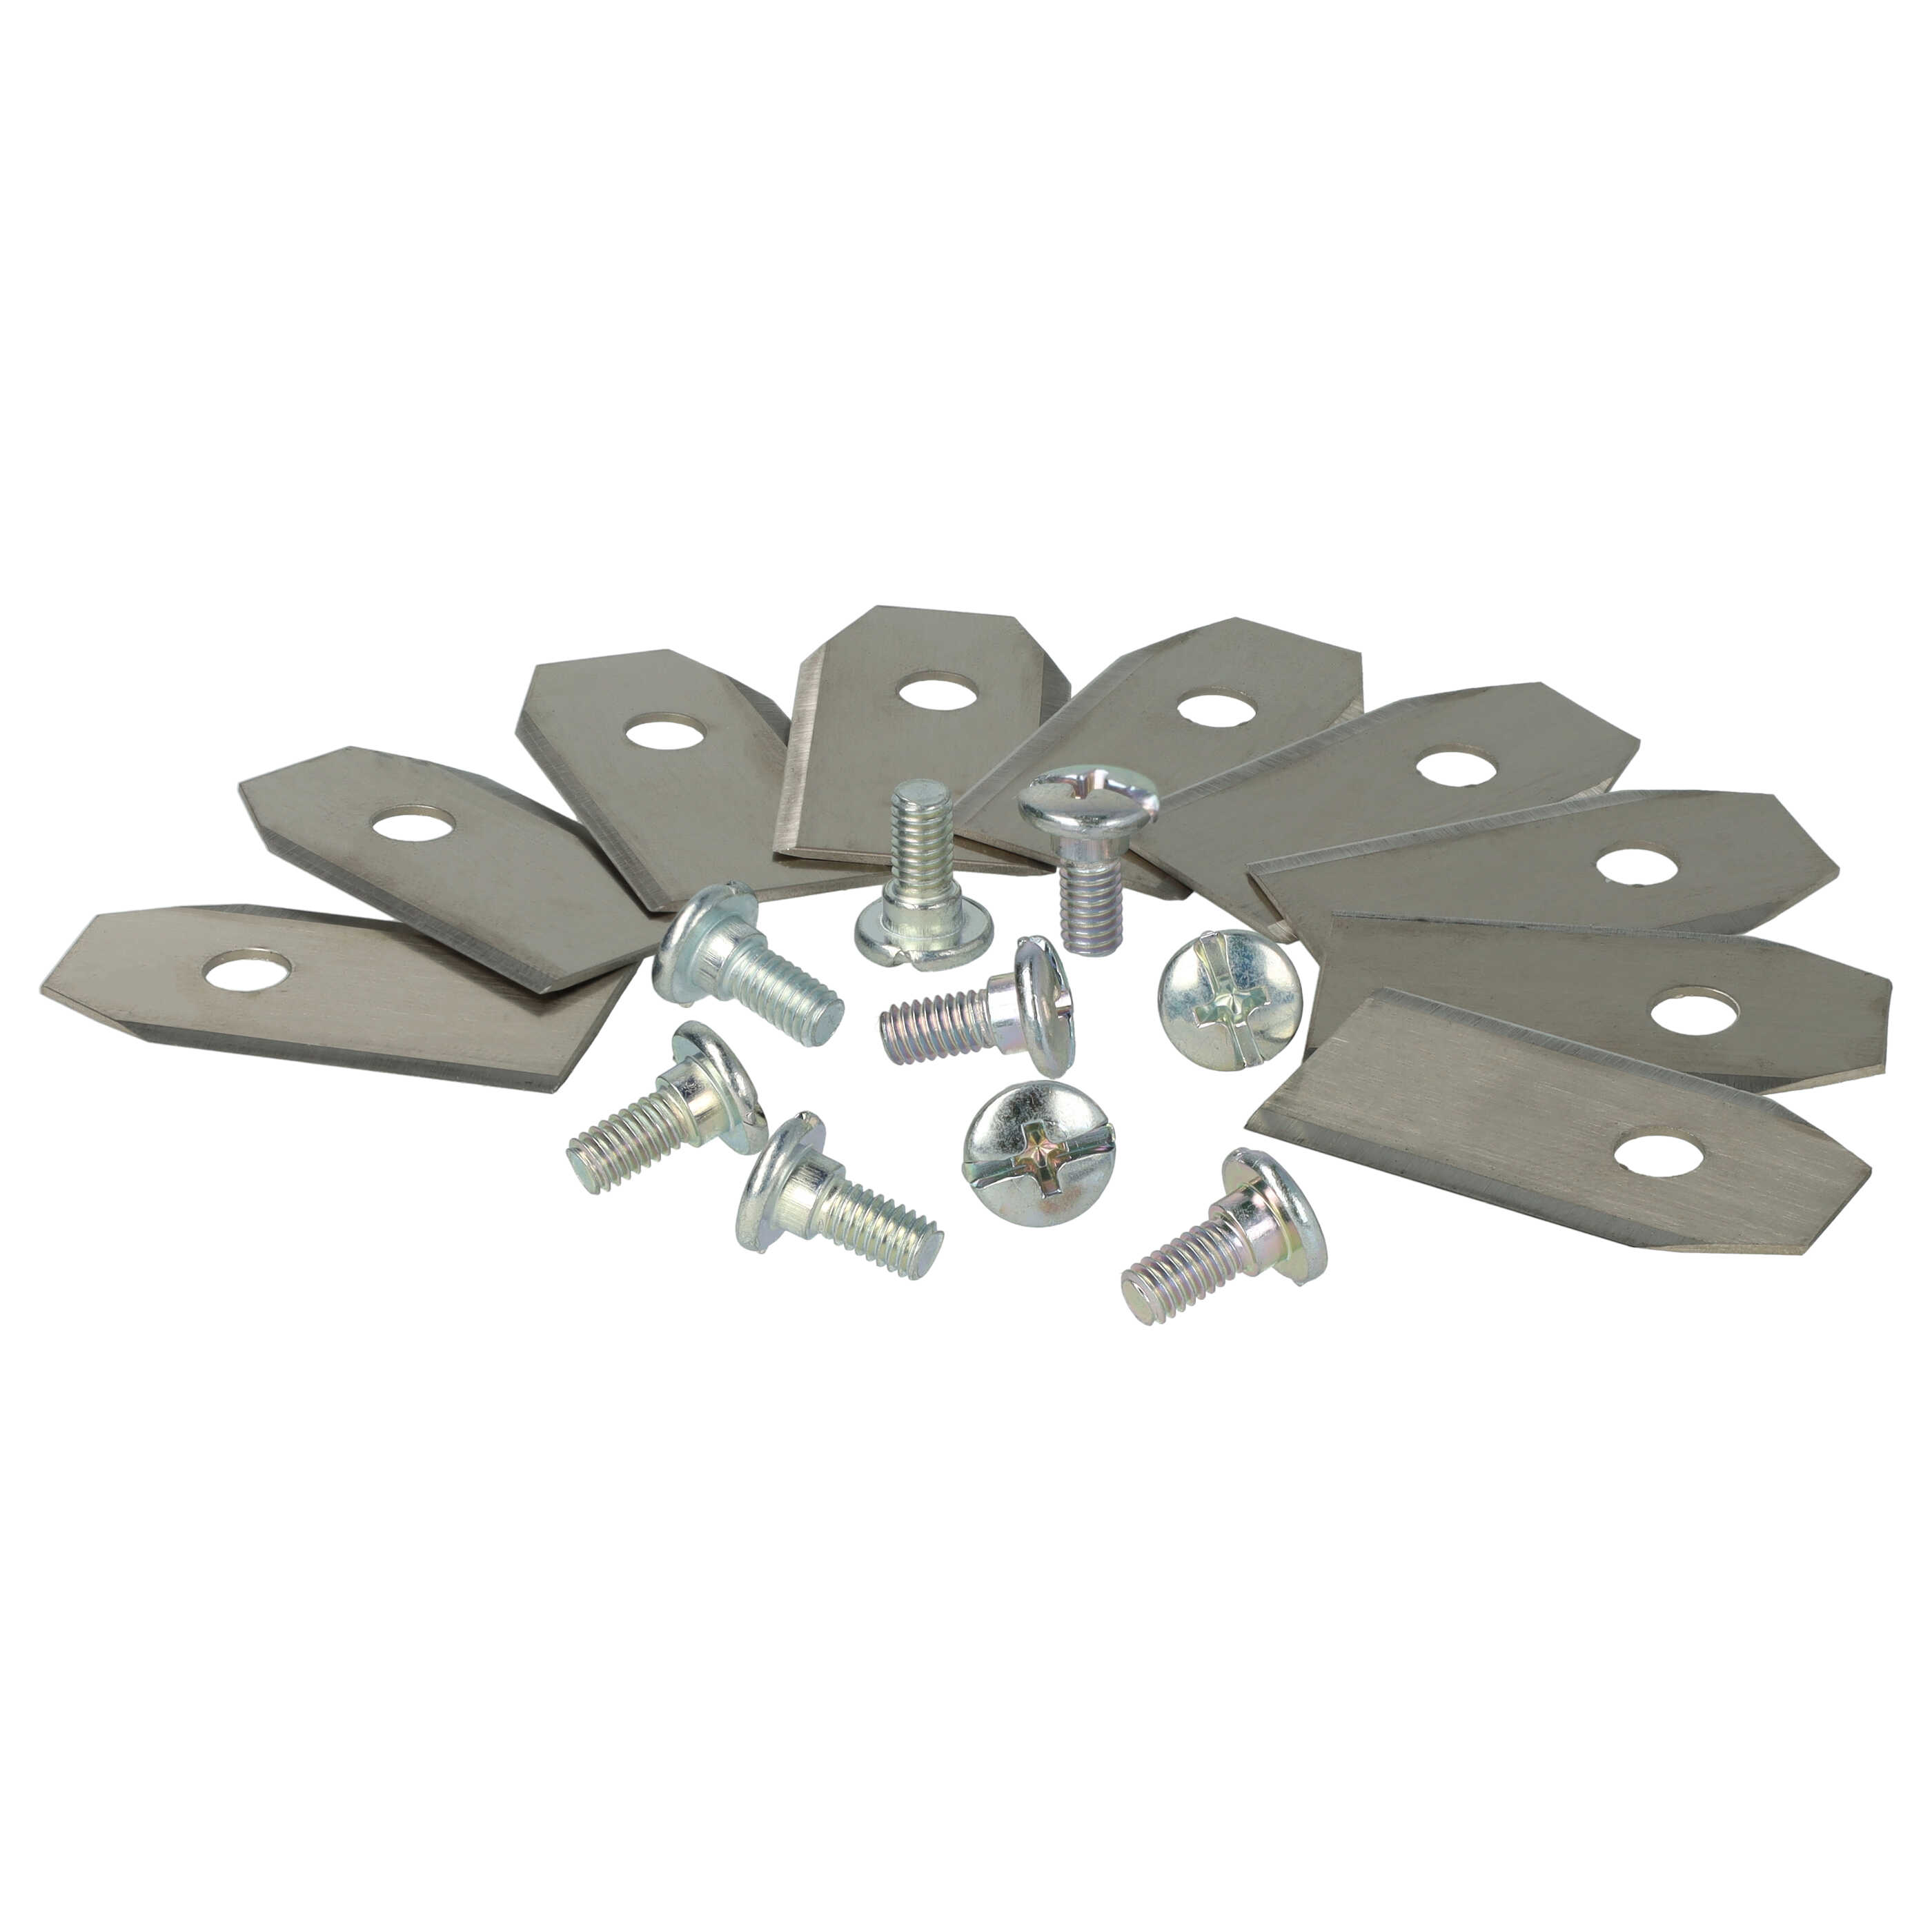 9x Exchange Blade replaces Arnold AR1 for Cordless Lawnmower etc. - steel, silver